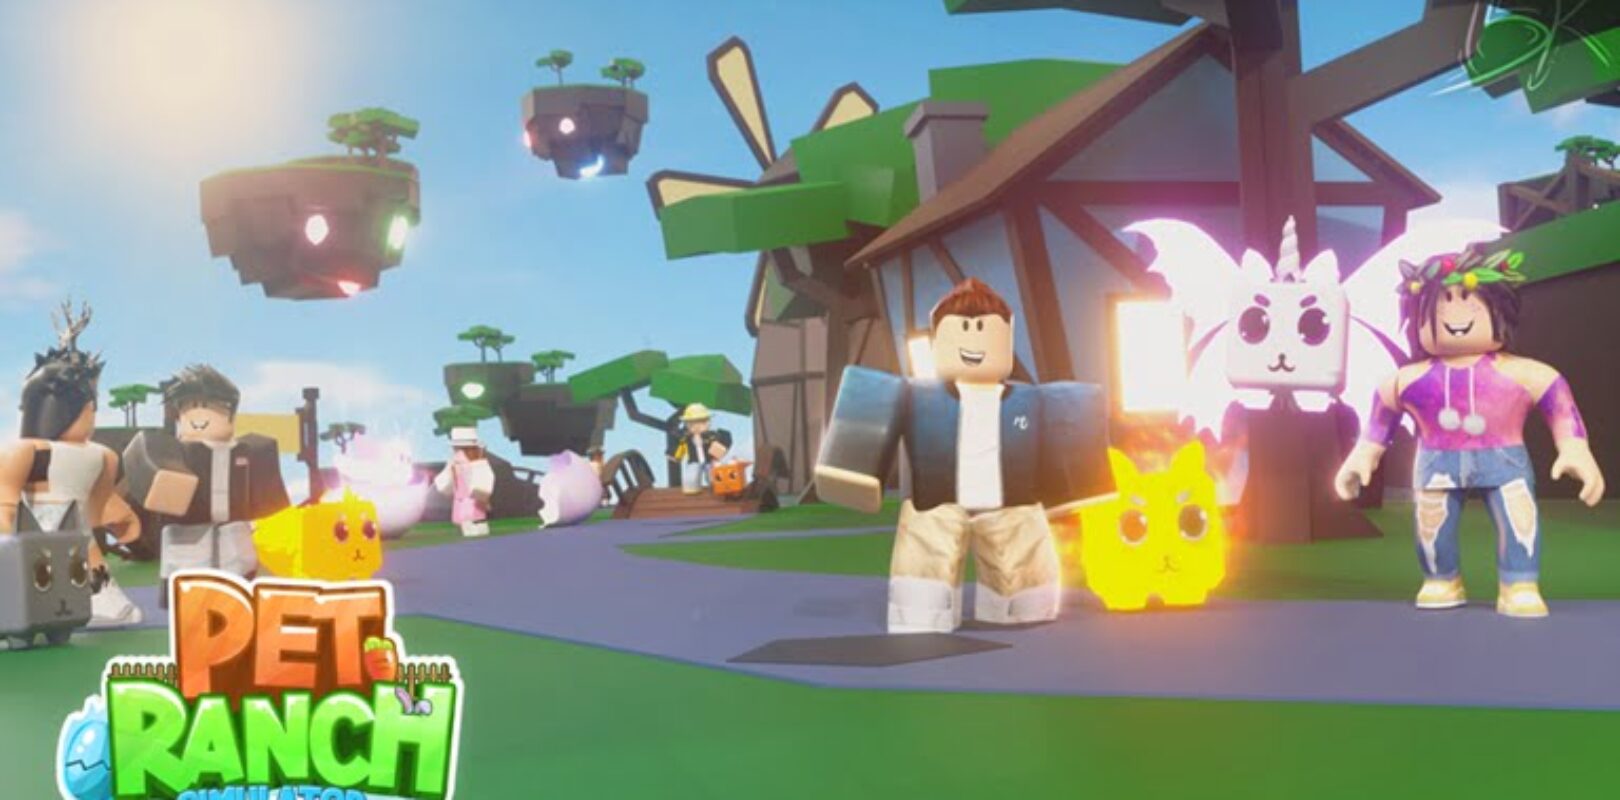 Pet Ranch Simulator Codes 2020 Pivotal Gamers - all pet ranch simulator update 5 codes 2019 pet ranch simulator update 5 roblox